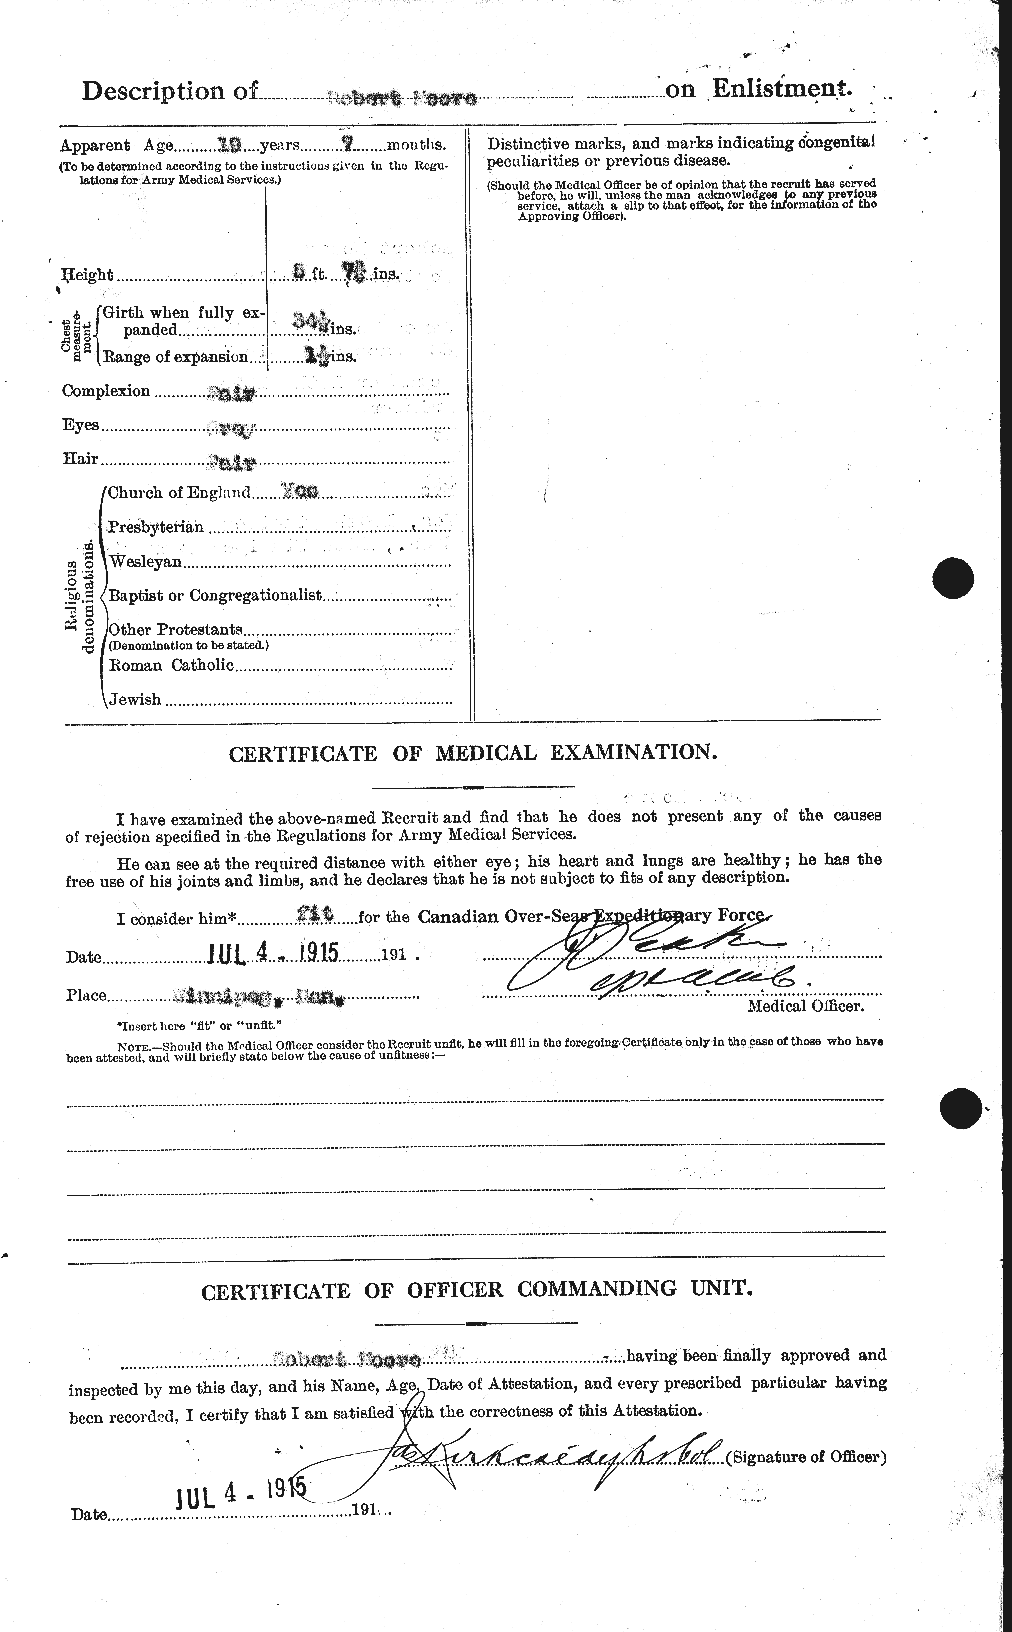 Personnel Records of the First World War - CEF 503549b